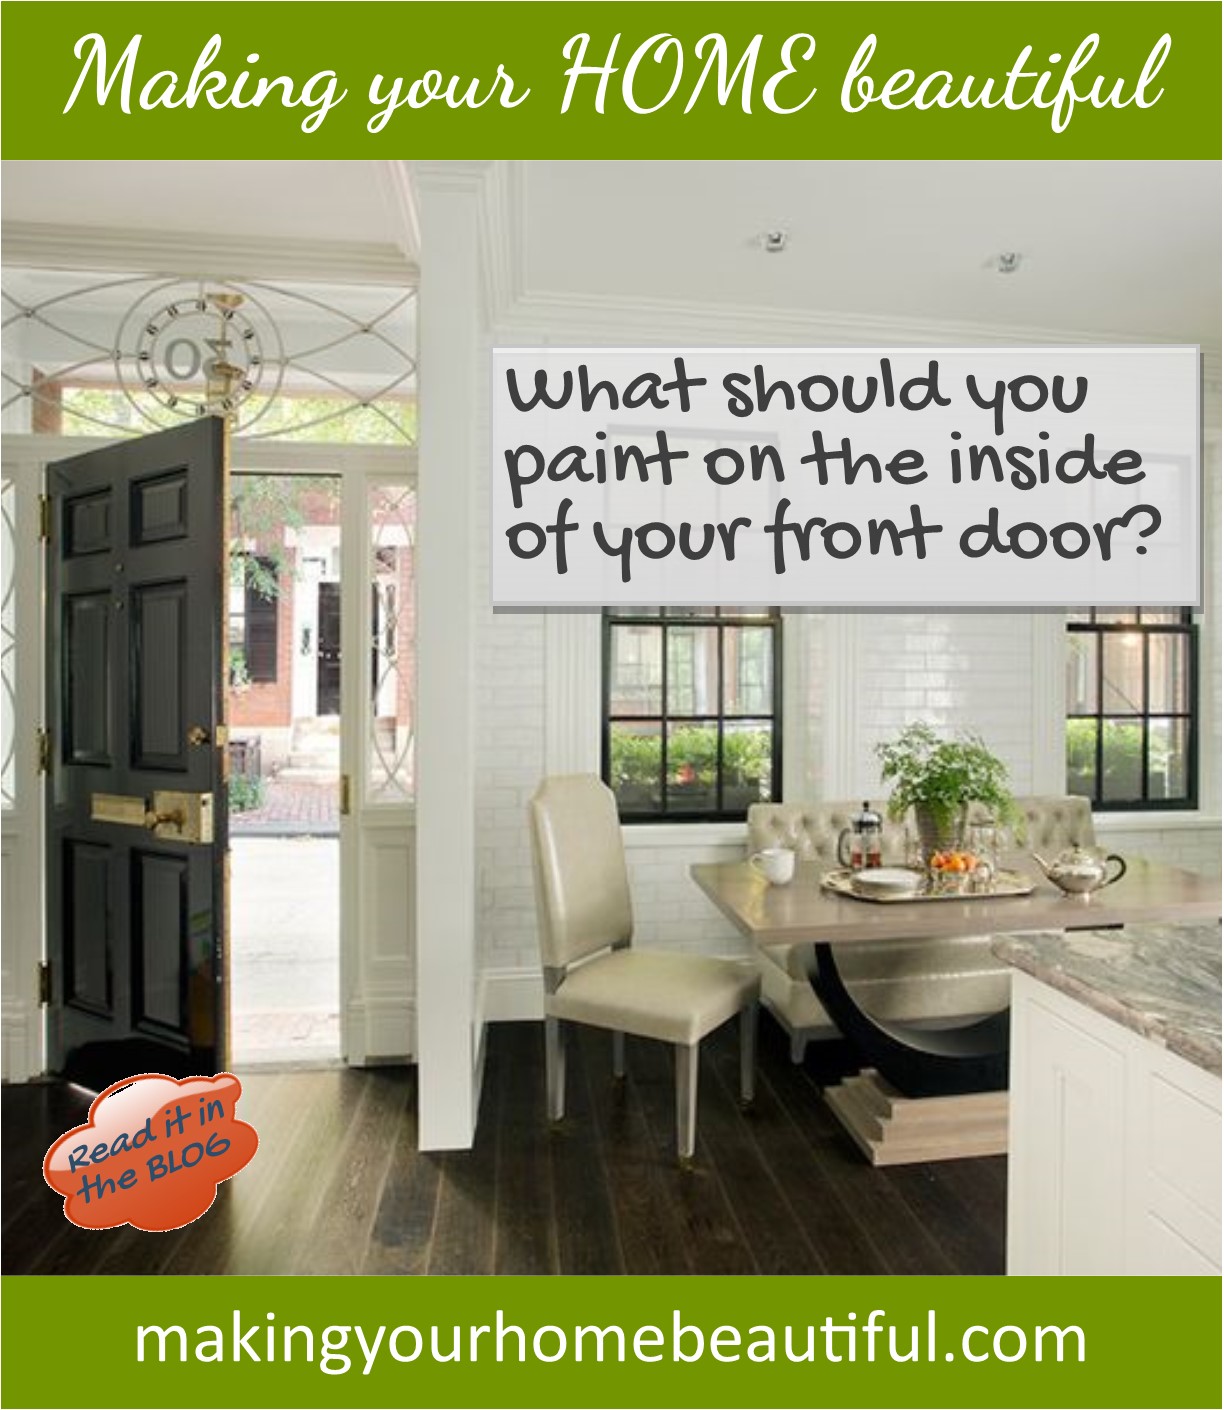 What should you paint on the inside of your front door?